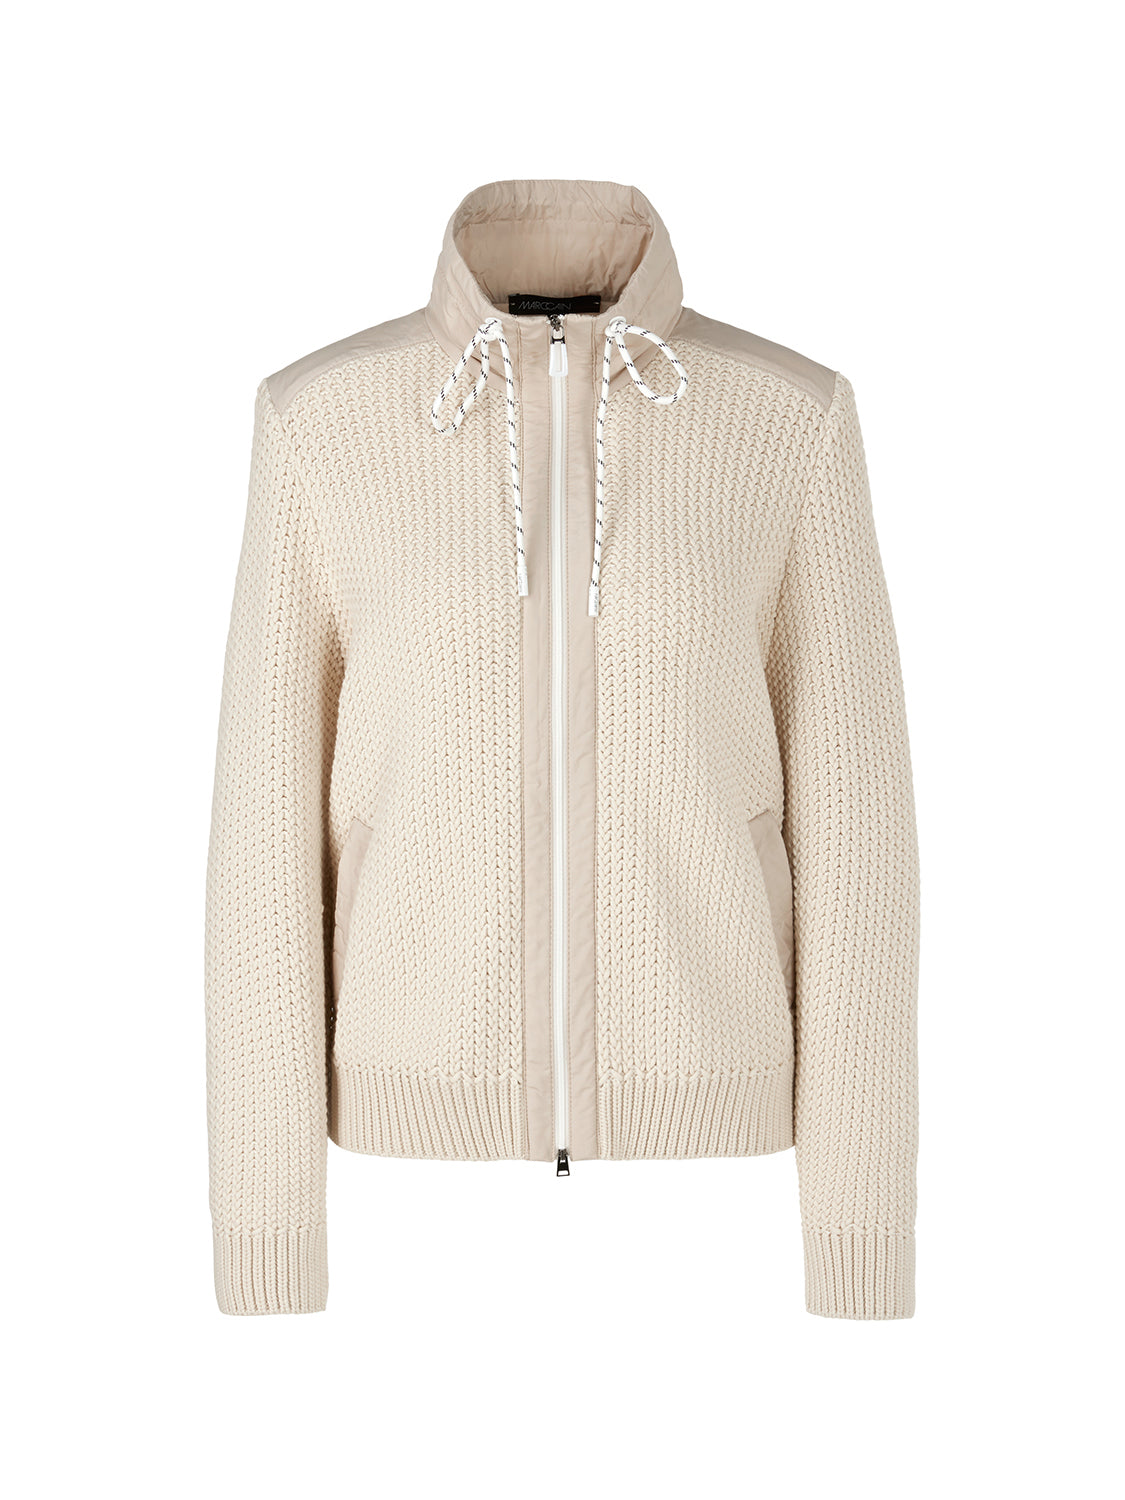 Marc Cain Sporty Cardigan Knitted In Germany WS 39.04 M02